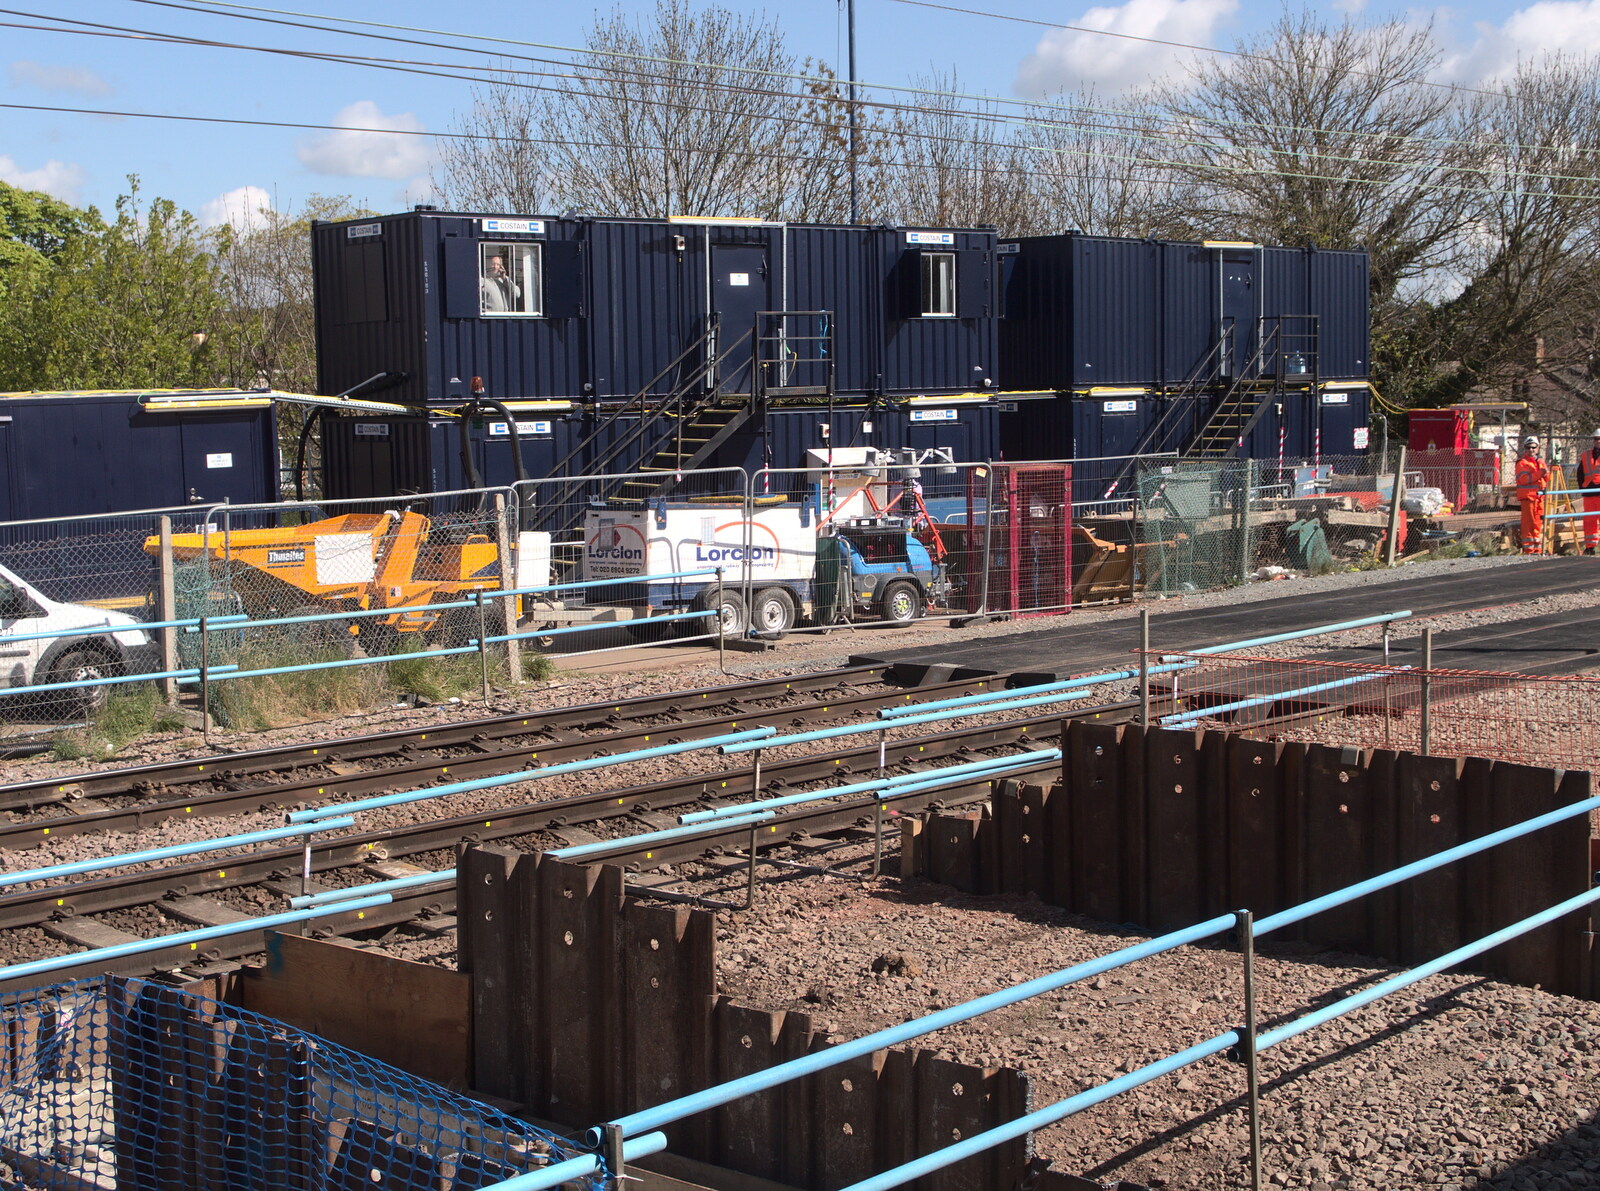 Engineering works at Shenfield from The Oaksmere's First Year Anniversary, Brome, Suffolk - 23rd April 2015